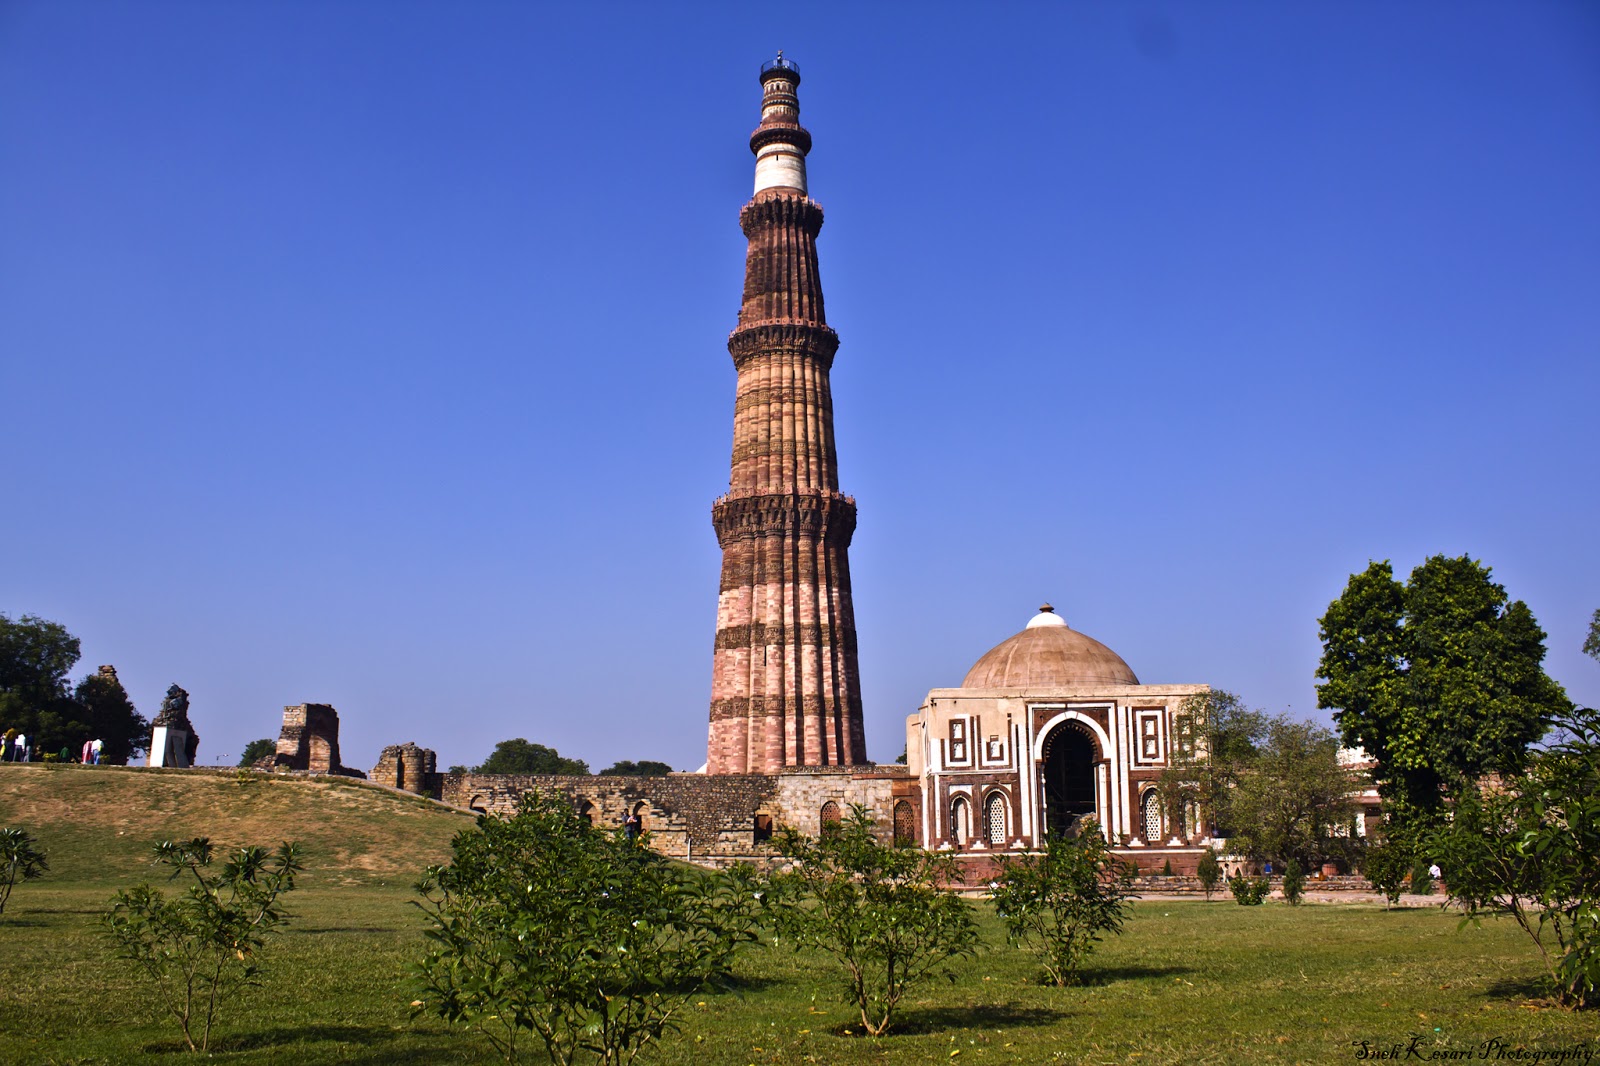 Historical Places In India: Images of Historical Places In India